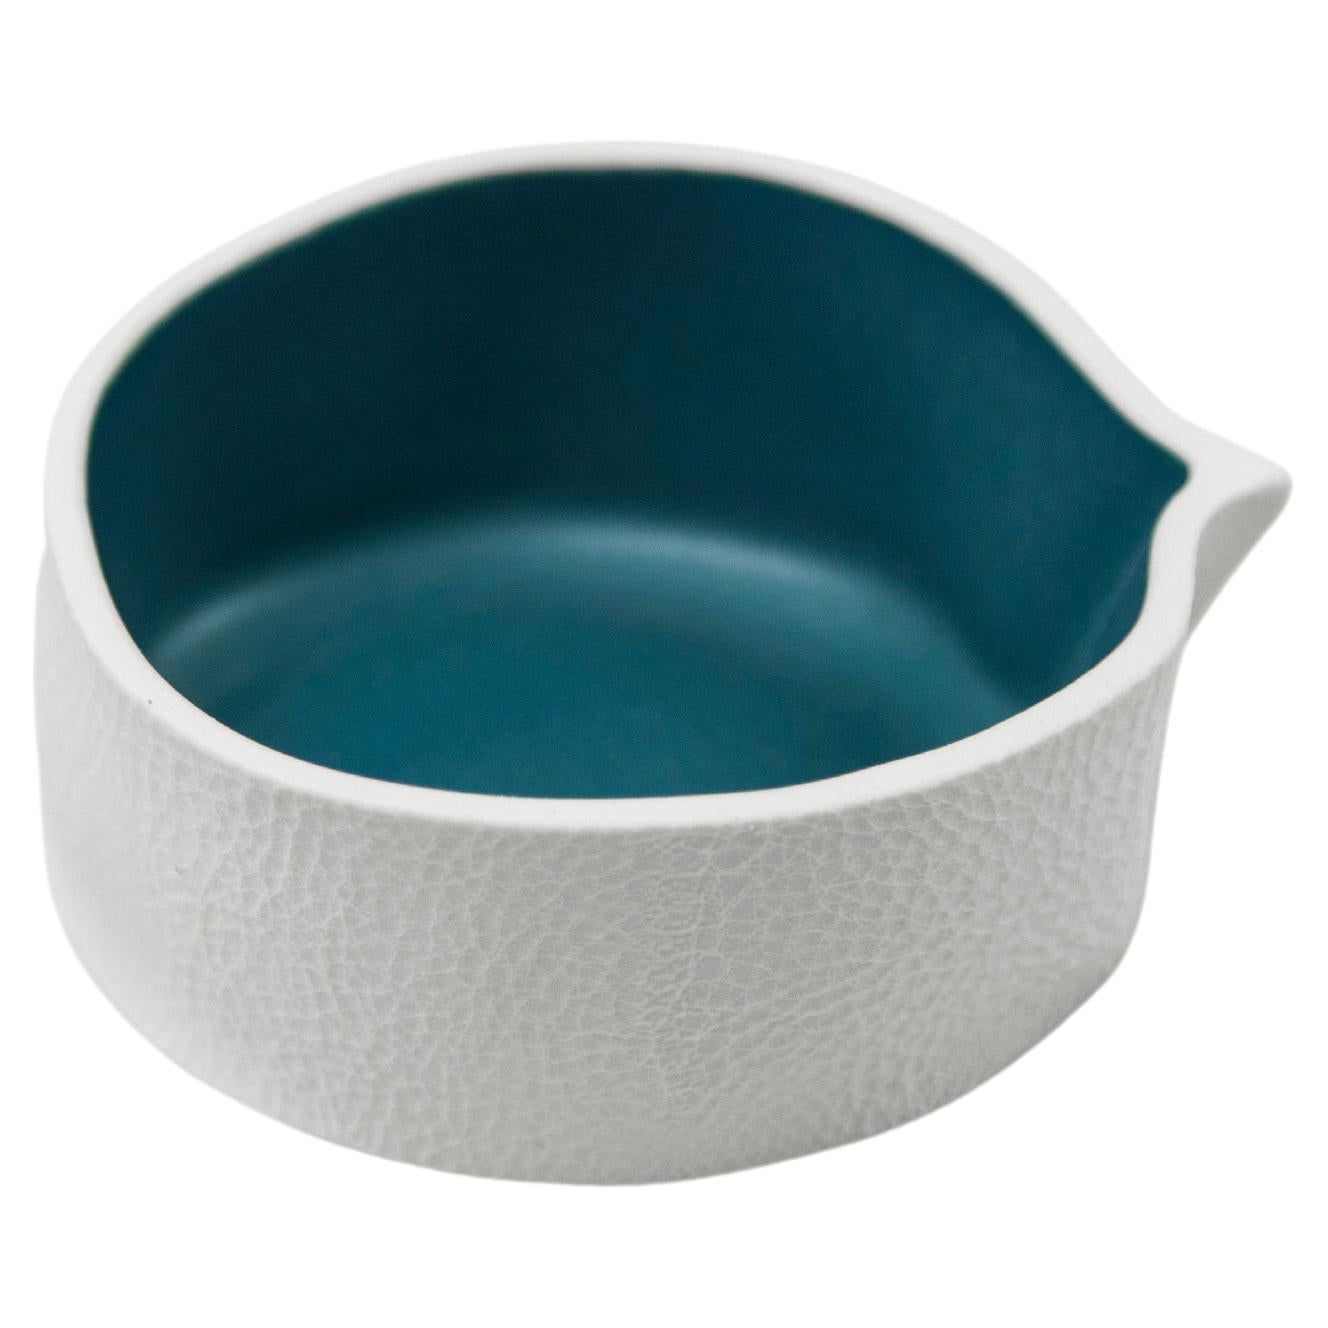 White & Teal Small Ceramic Kawa Dish, Textured Porcelain Catchall Bowl For Sale